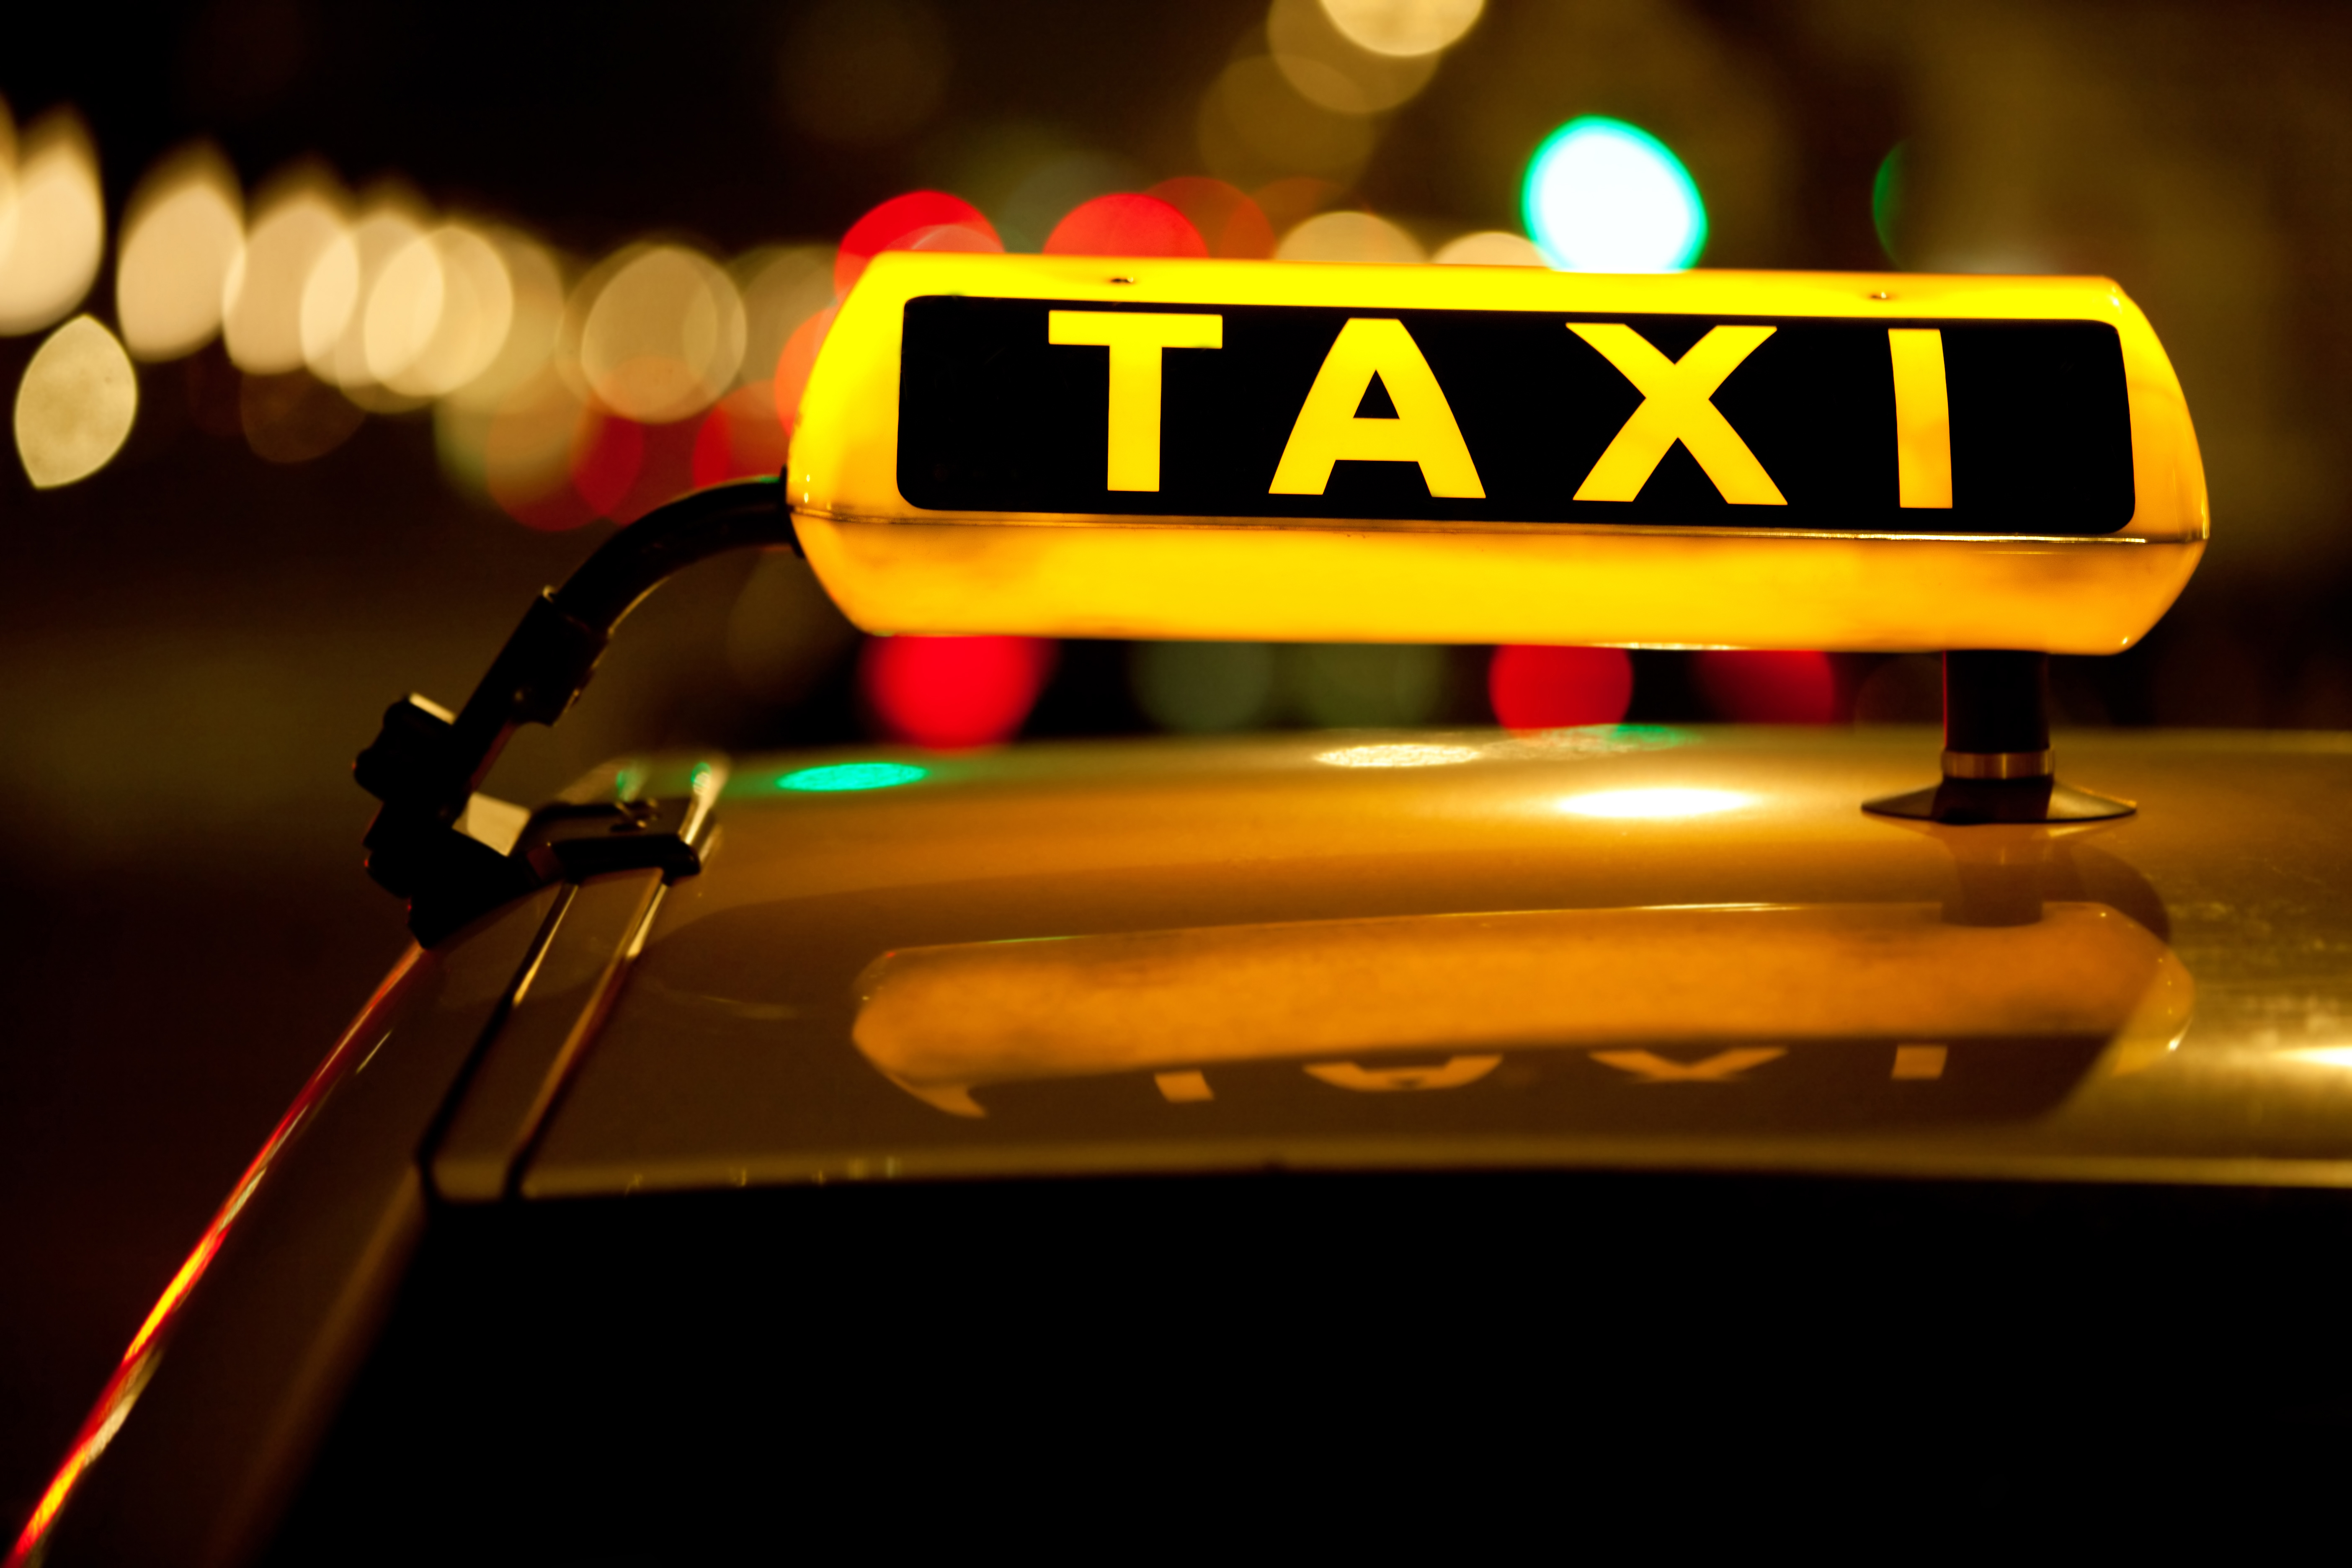 taxi, vehicles, neon sign